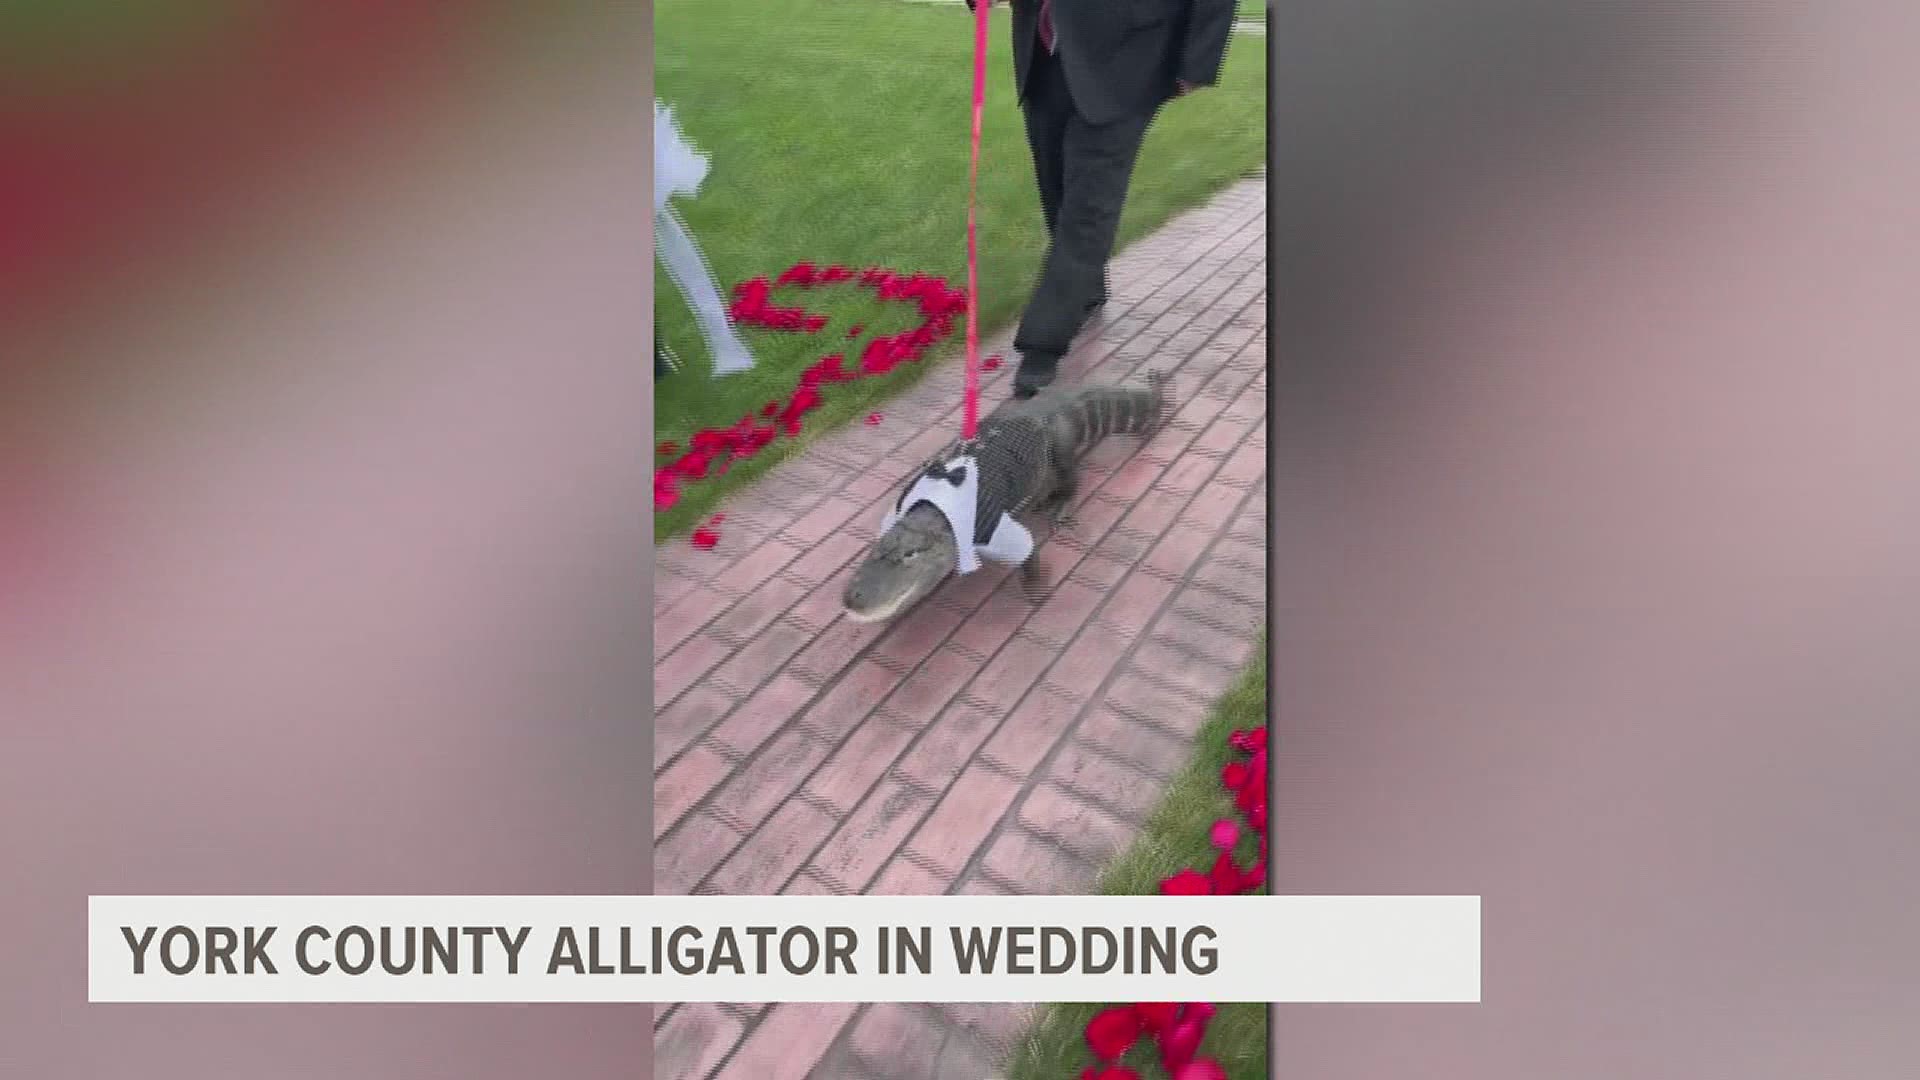 Wally the emotional support alligator wore a tux and served as the ring bearer.